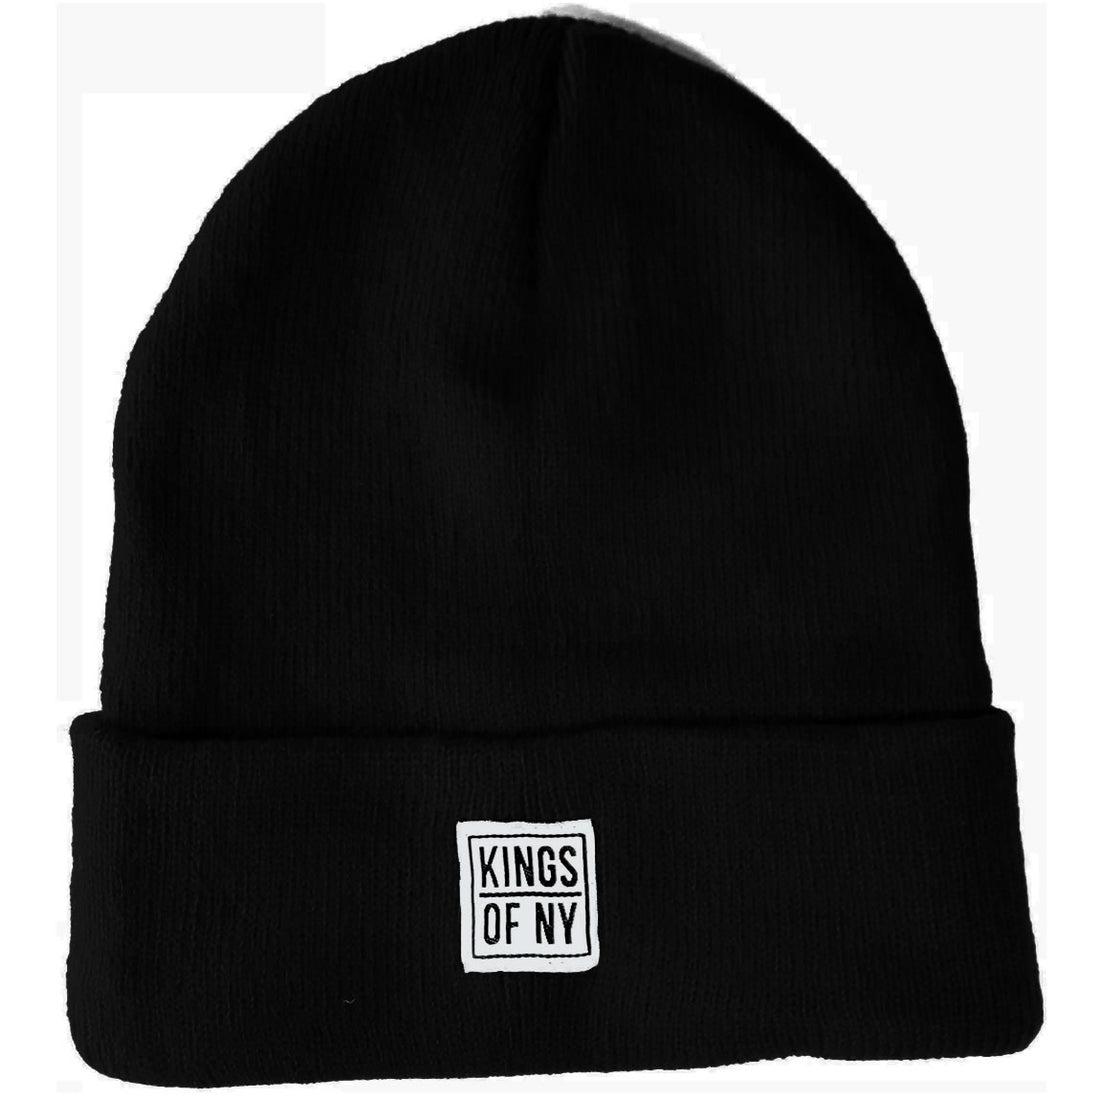 Black Beanie Hat by Kings Of NY